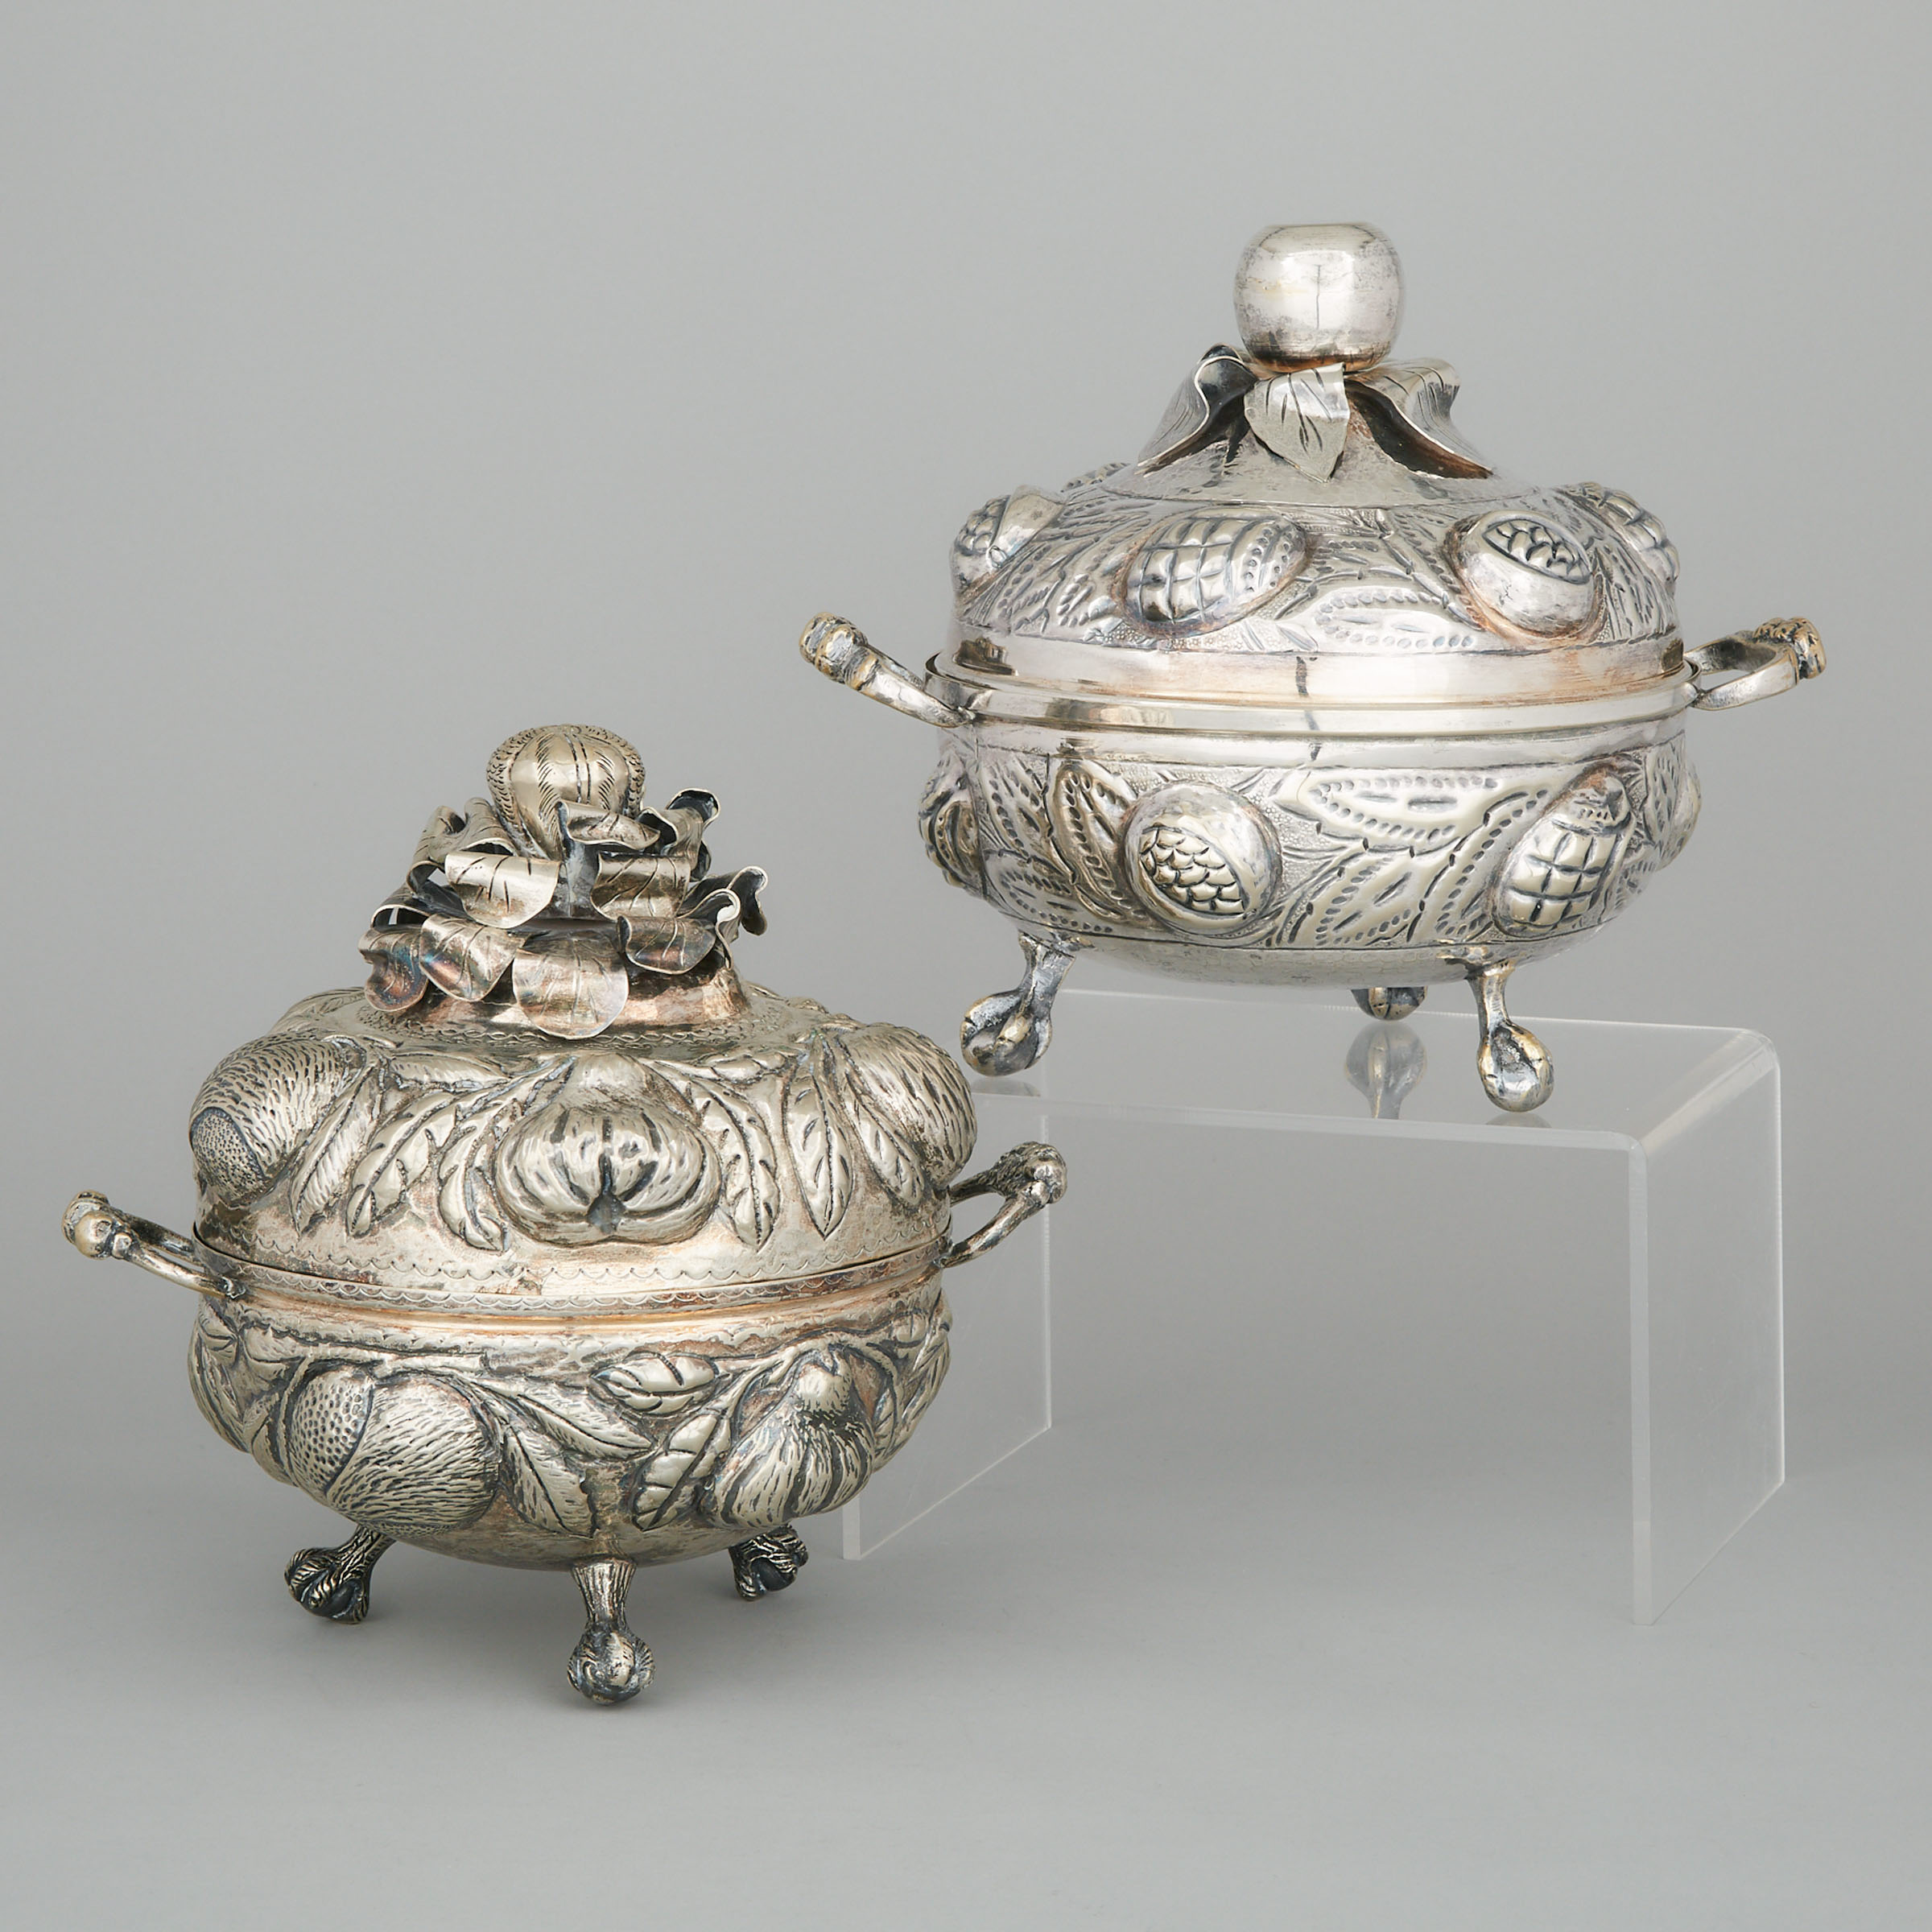 Two South American Silver Plated Two-Handled Tureens, 20th century